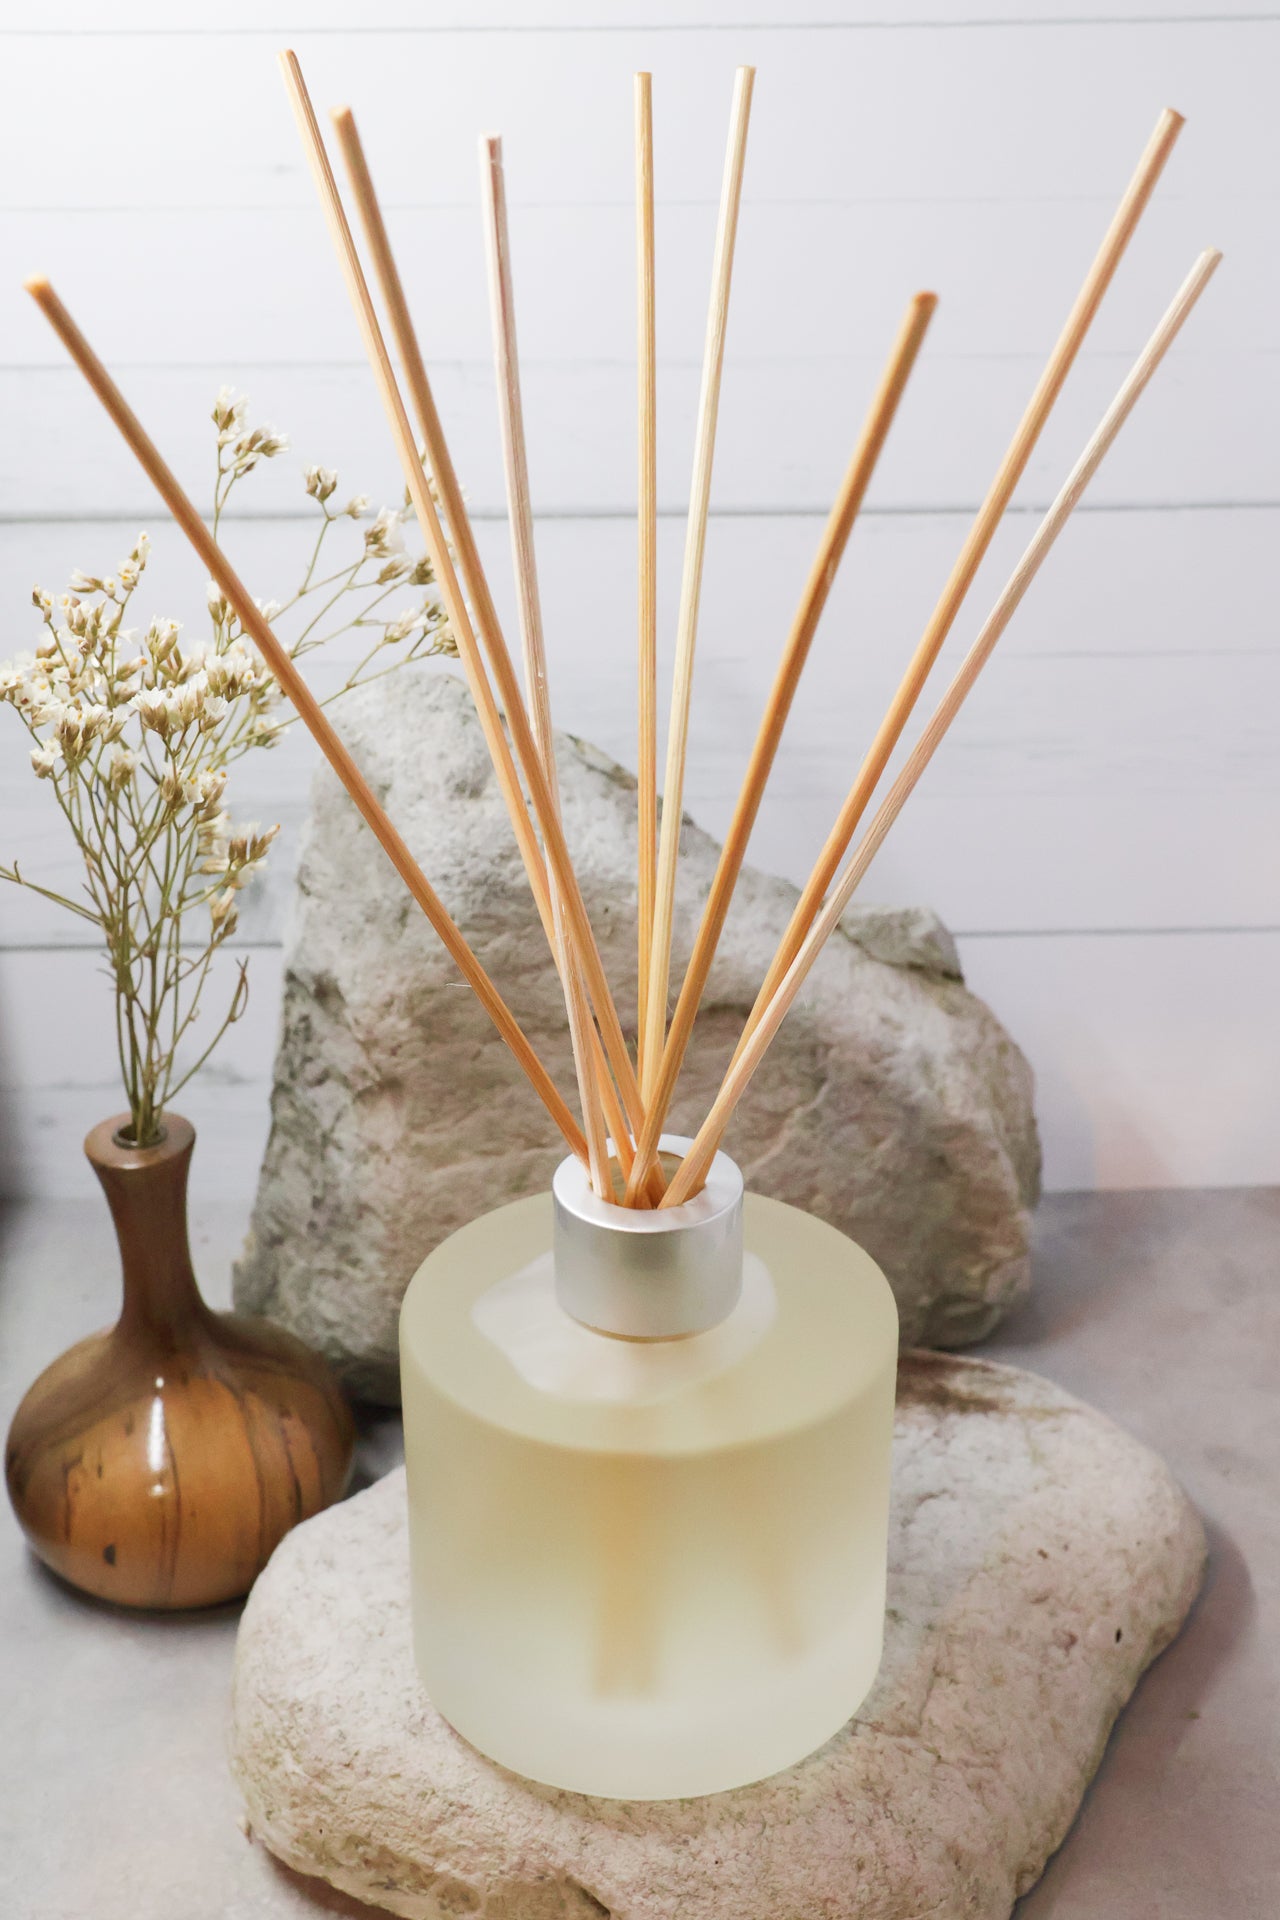 Crystal infused diffuser with wicks with the fragrance Orchid, Patchouli and White Musk